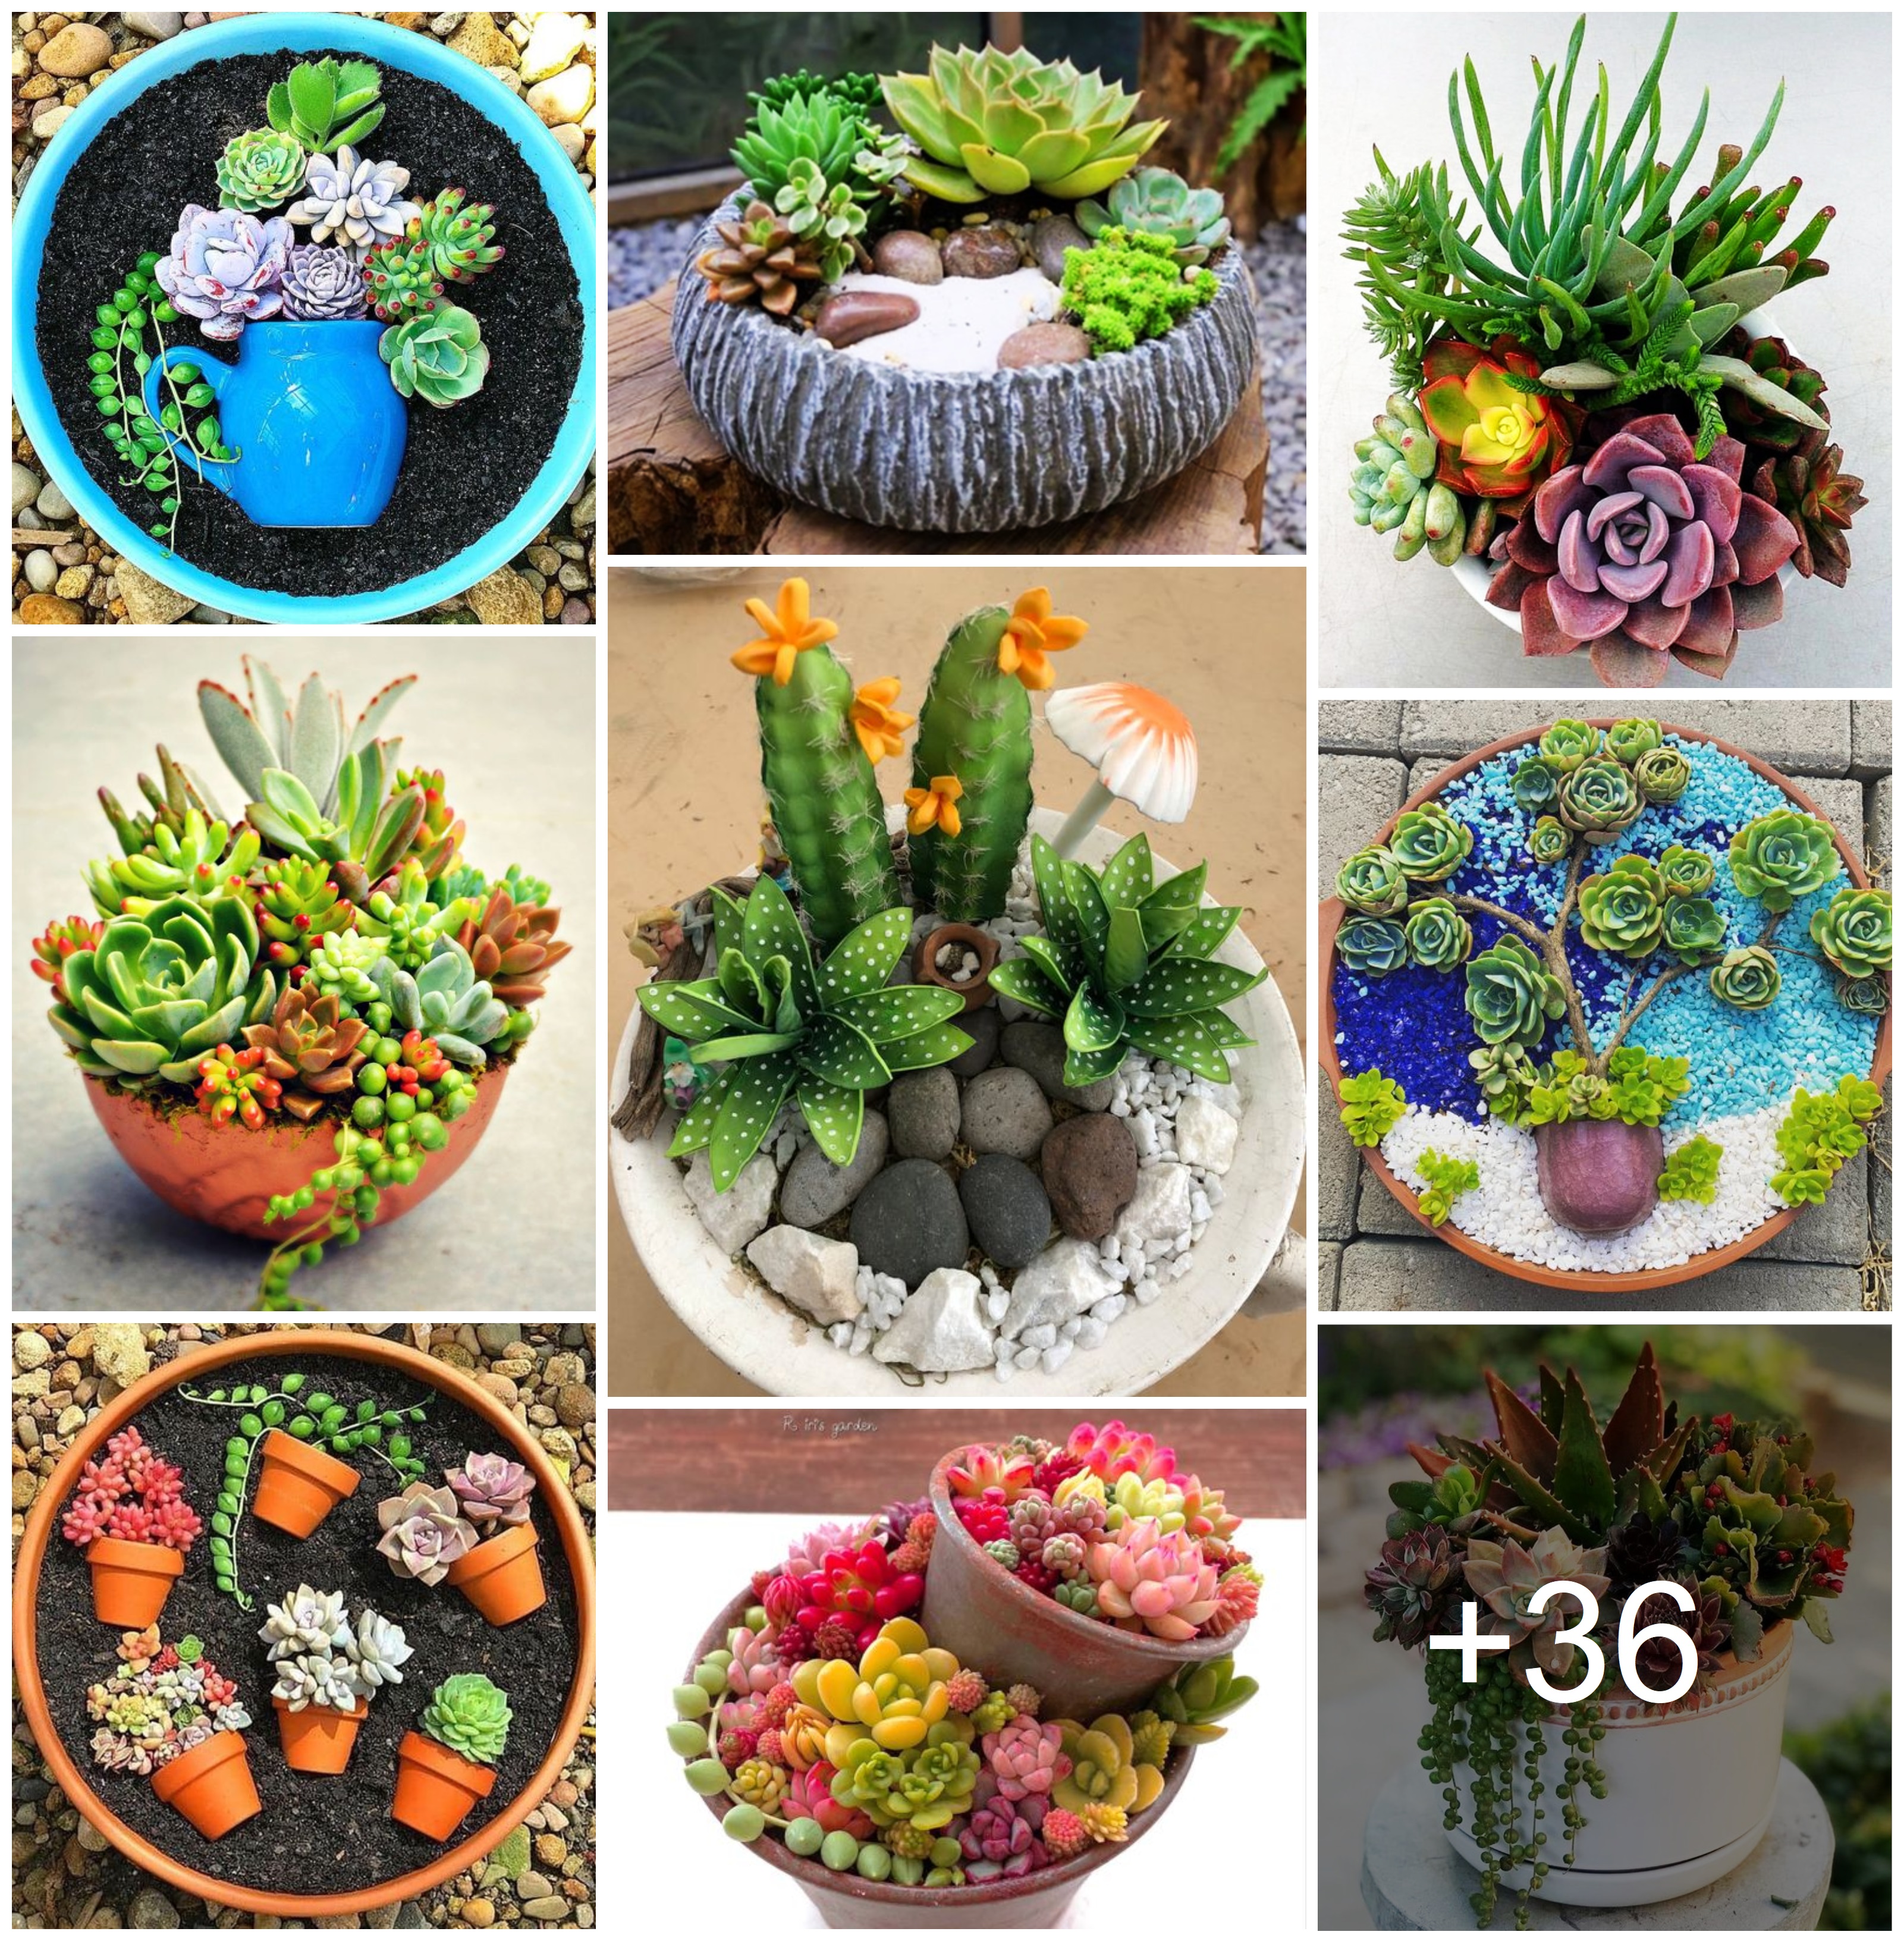 Dazzling succulent planters that will add sparkle to your home